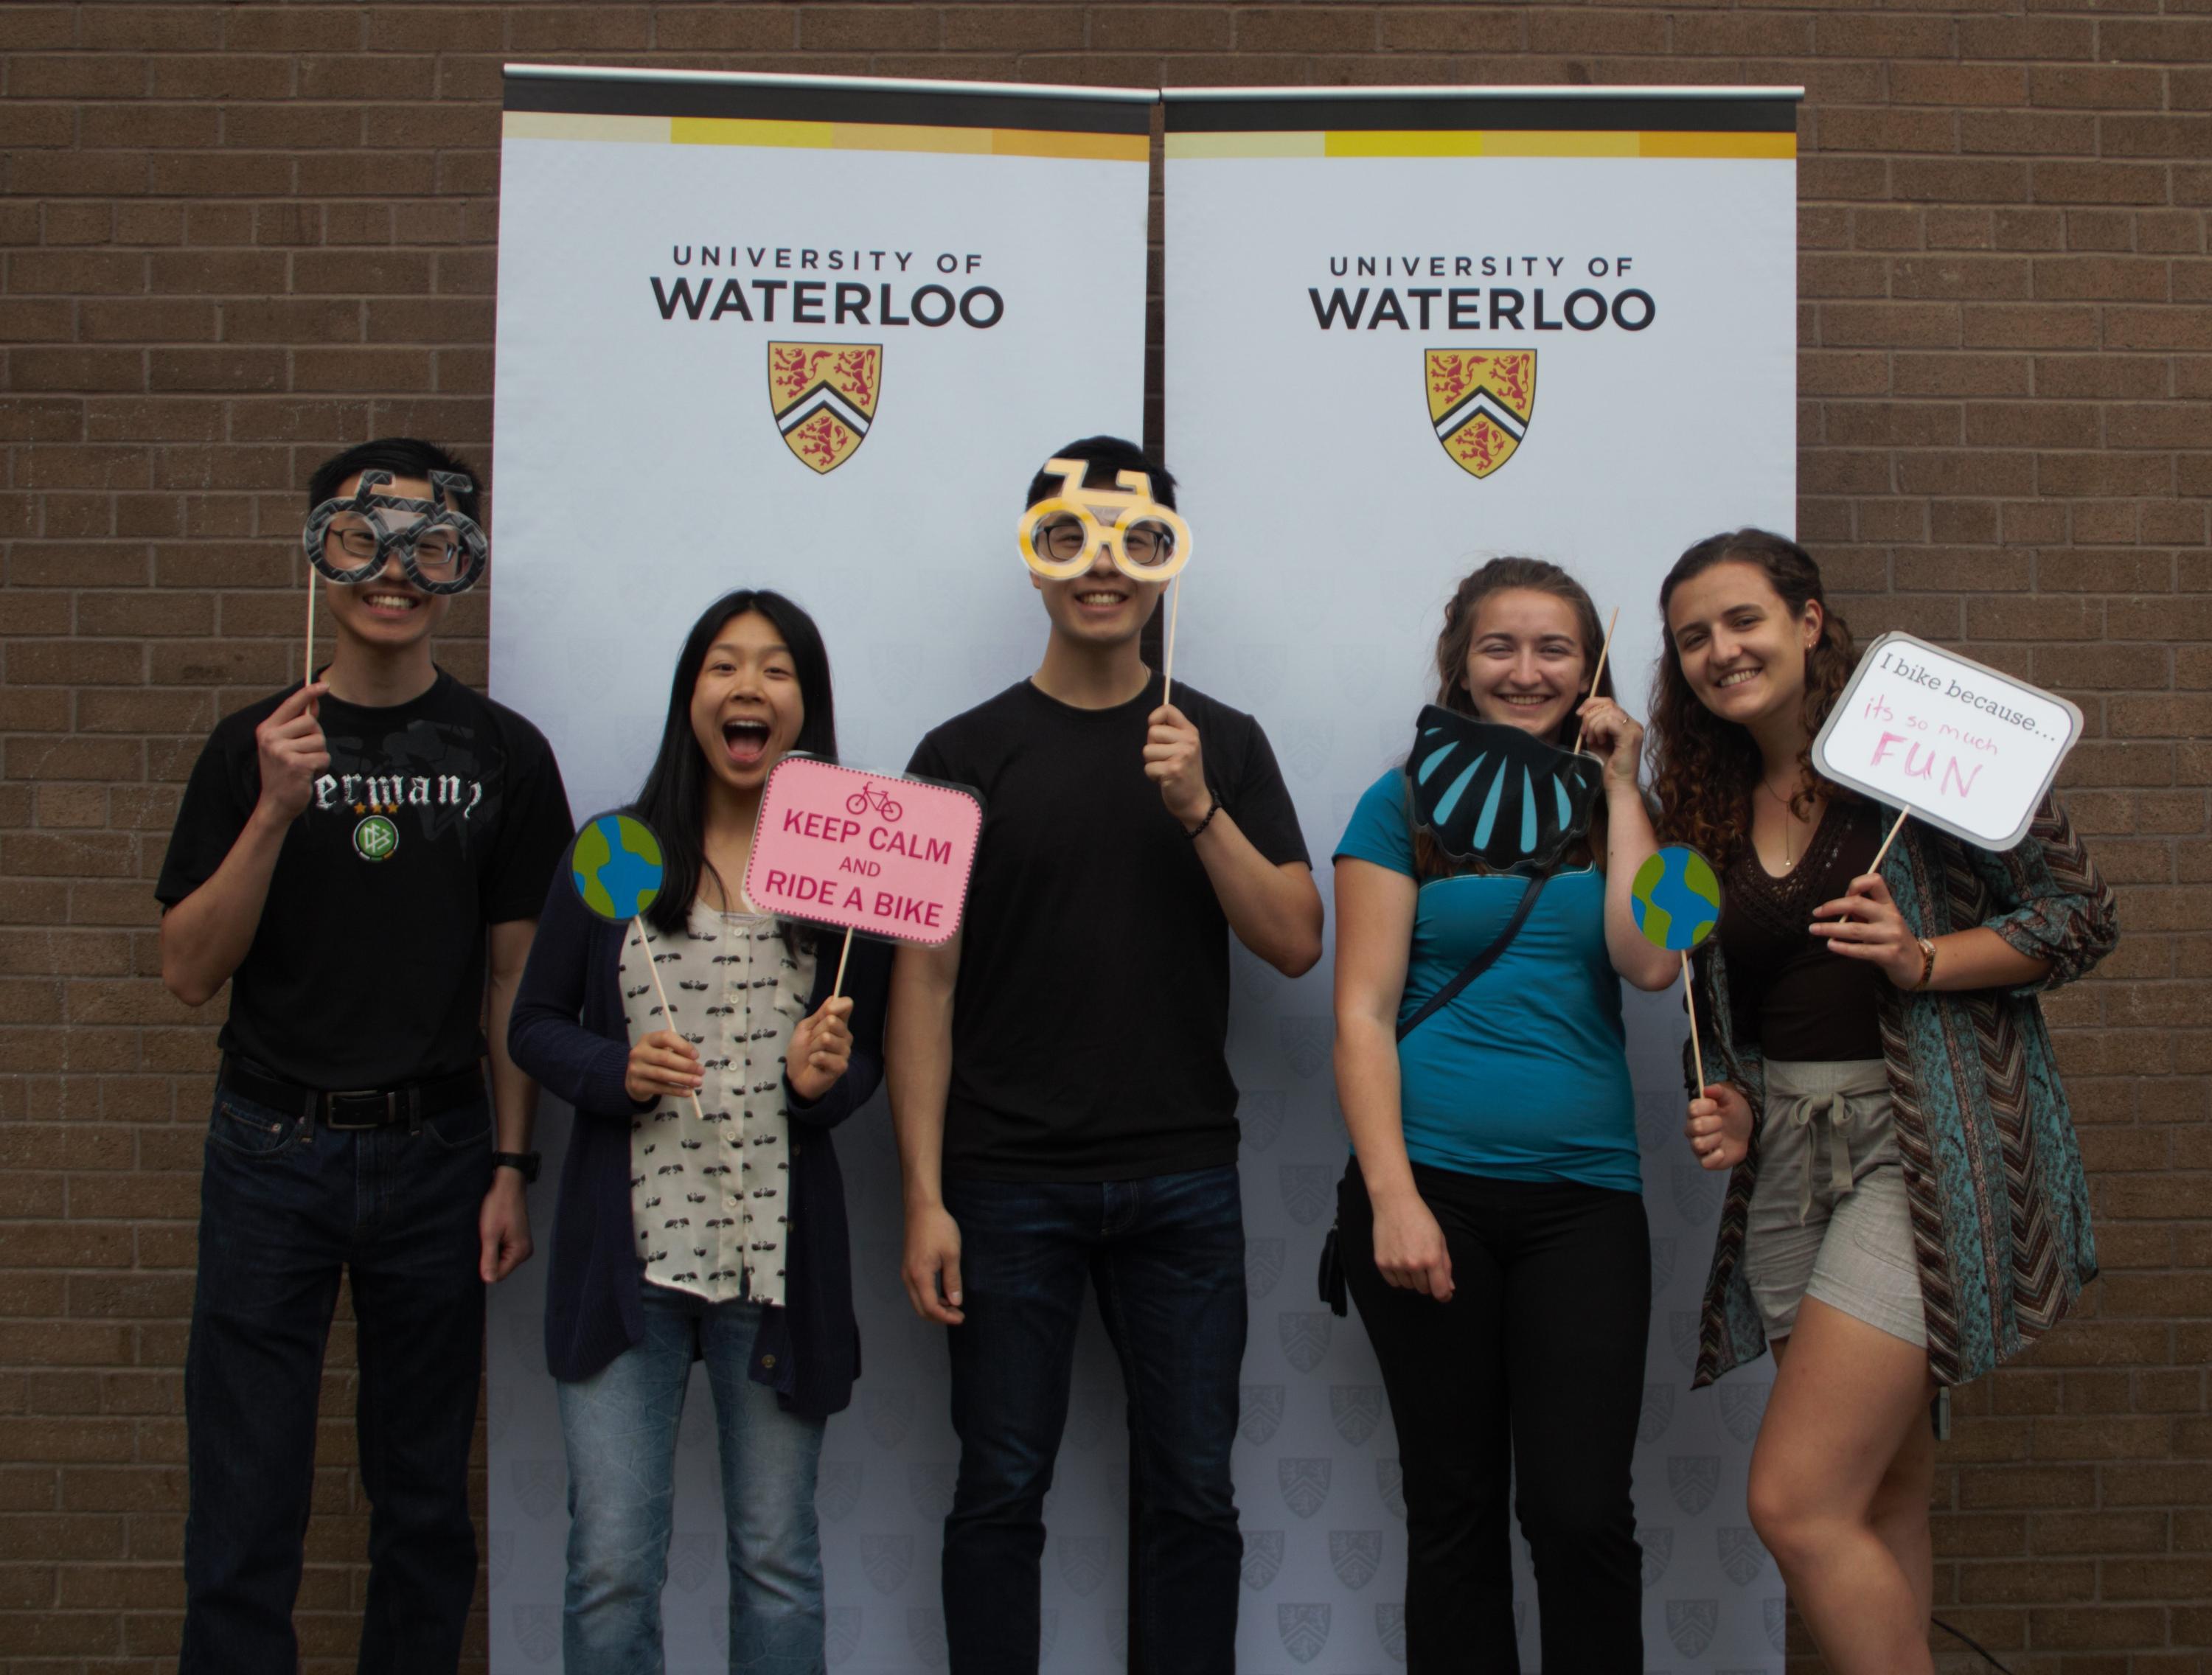 Students in photobooth at annual Bike Day 2018